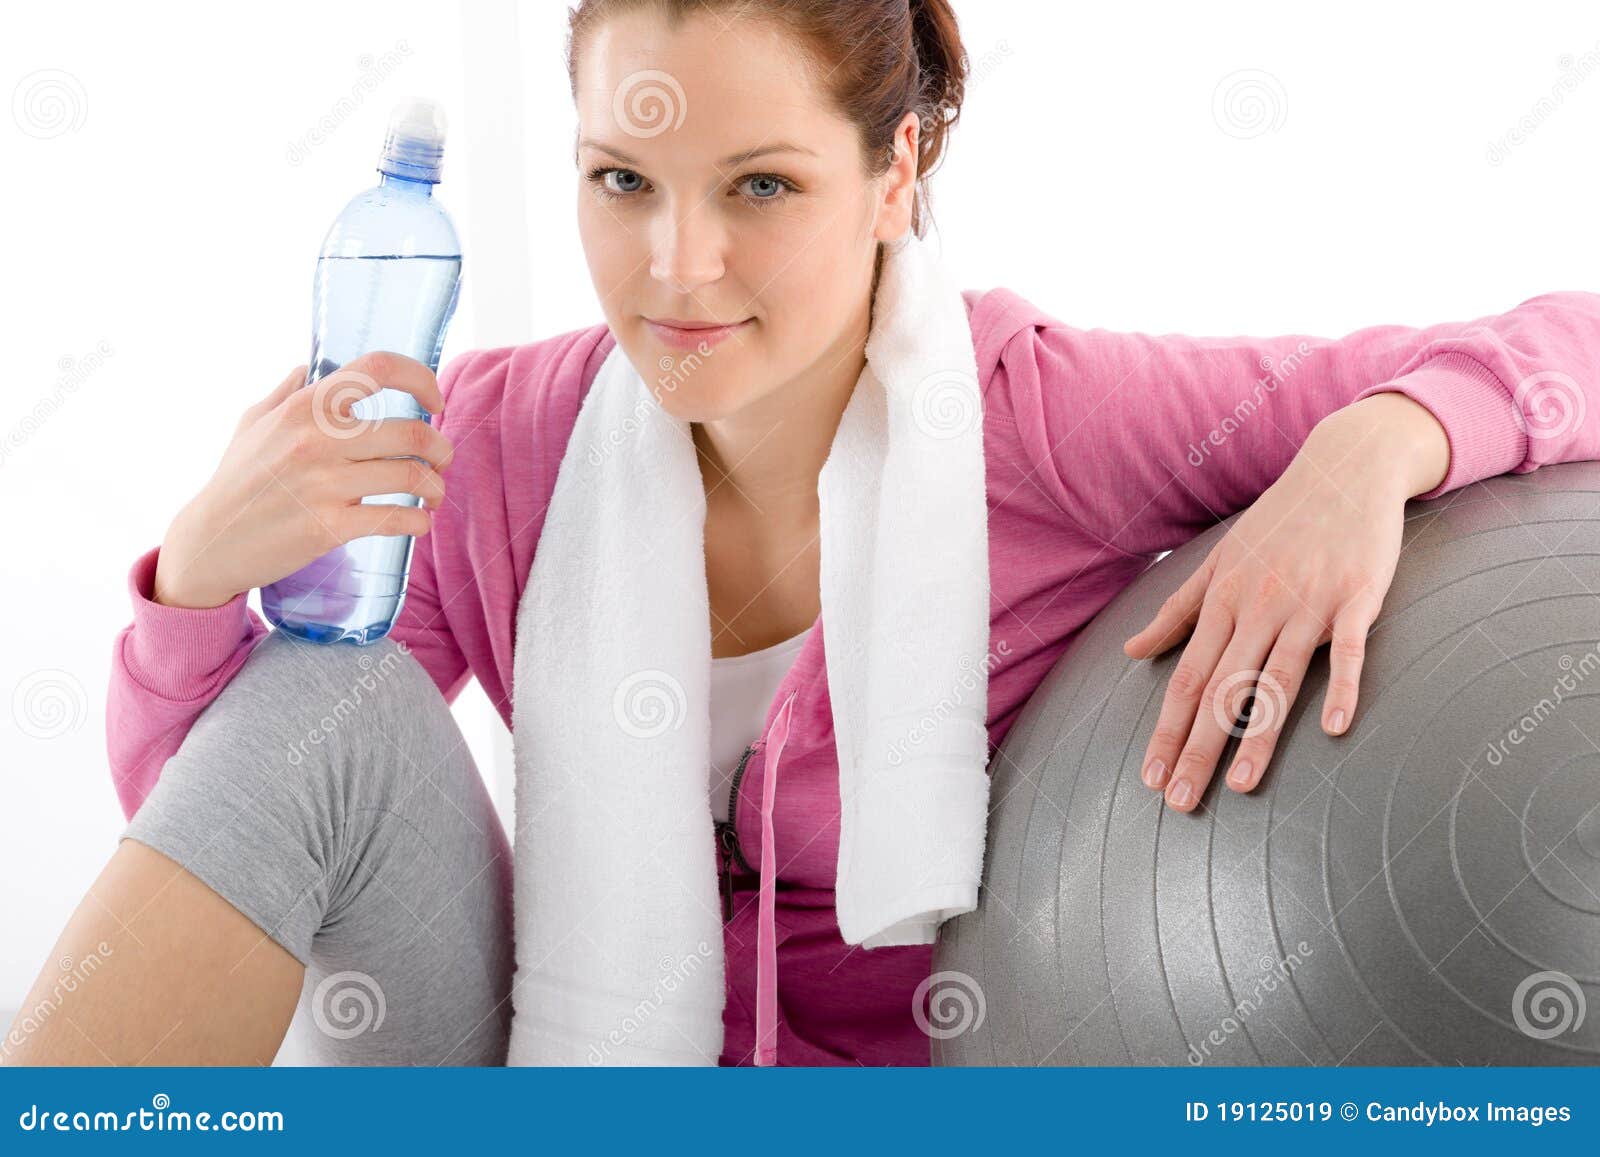 Fitness - Woman Relax Water Bottle Exercise Ball Stock Image - Image of  smiling, training: 19125019